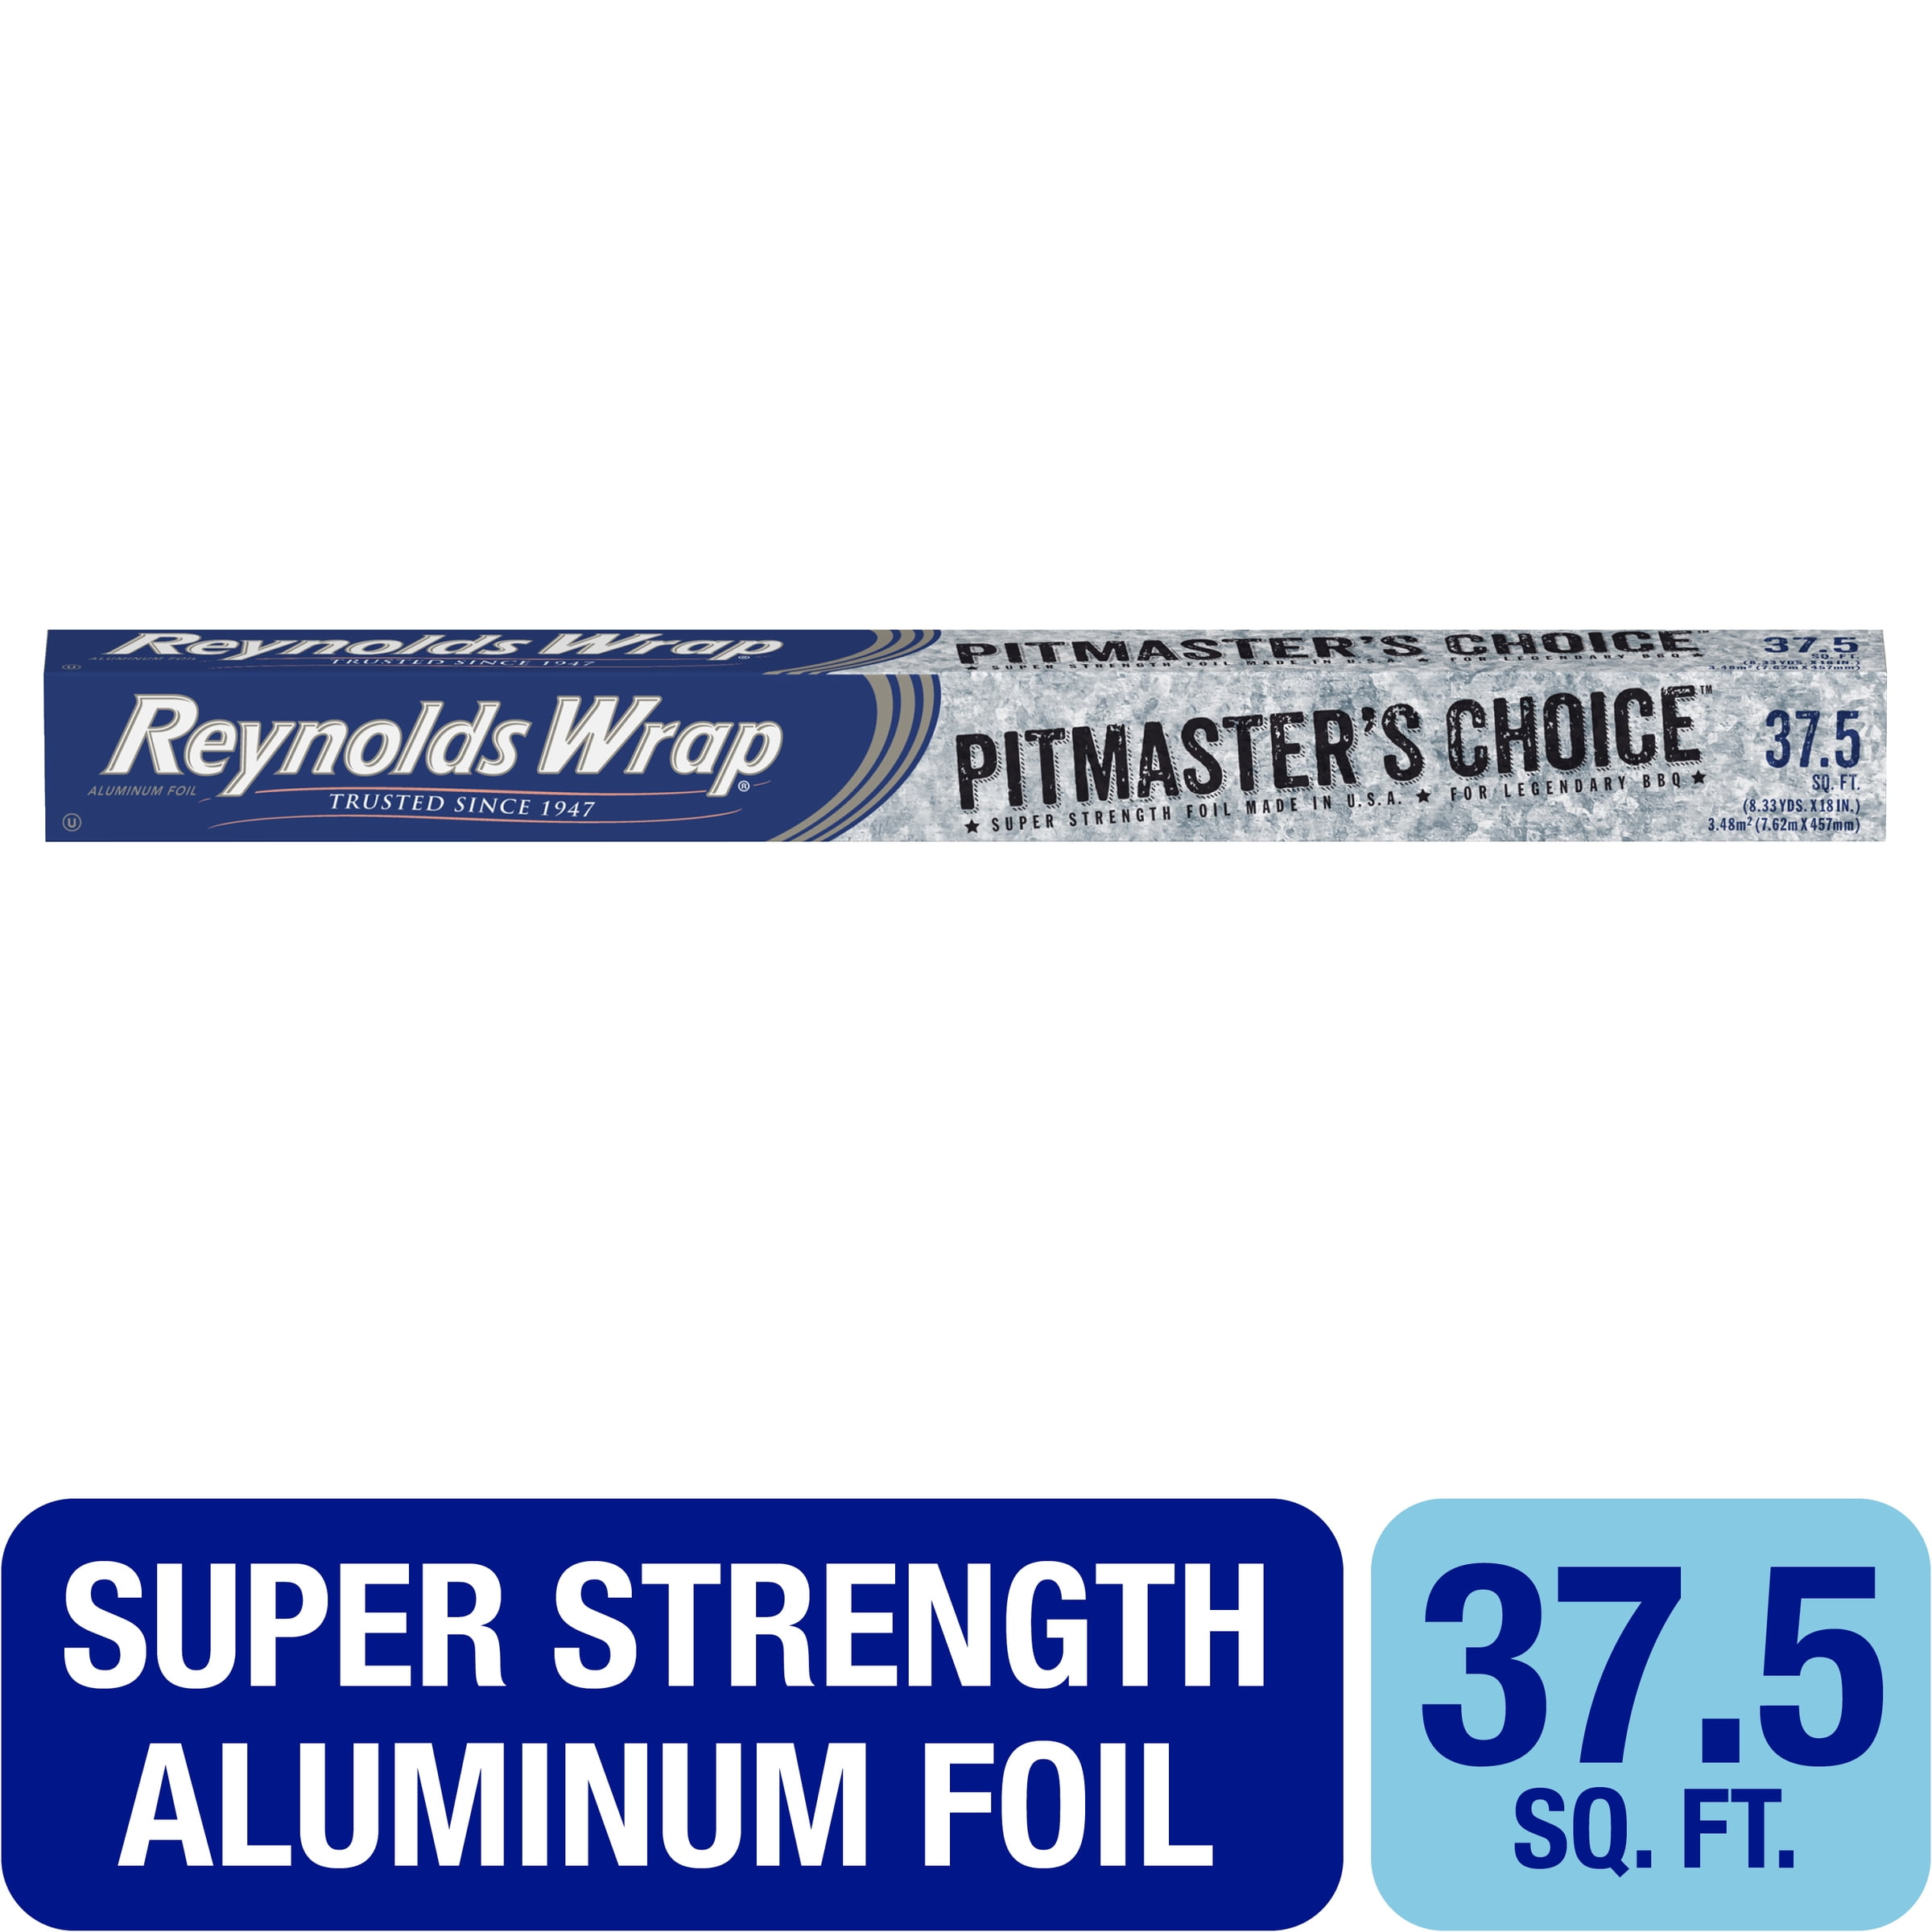 37.5 Square Feet Glad Extra Wide Aluminum Foil Glad Grilling and Baking Accessories Roasting Tin Foil For Grilling BBQ Accessories Baking Aluminum Foil Sheets Aluminum Roll 